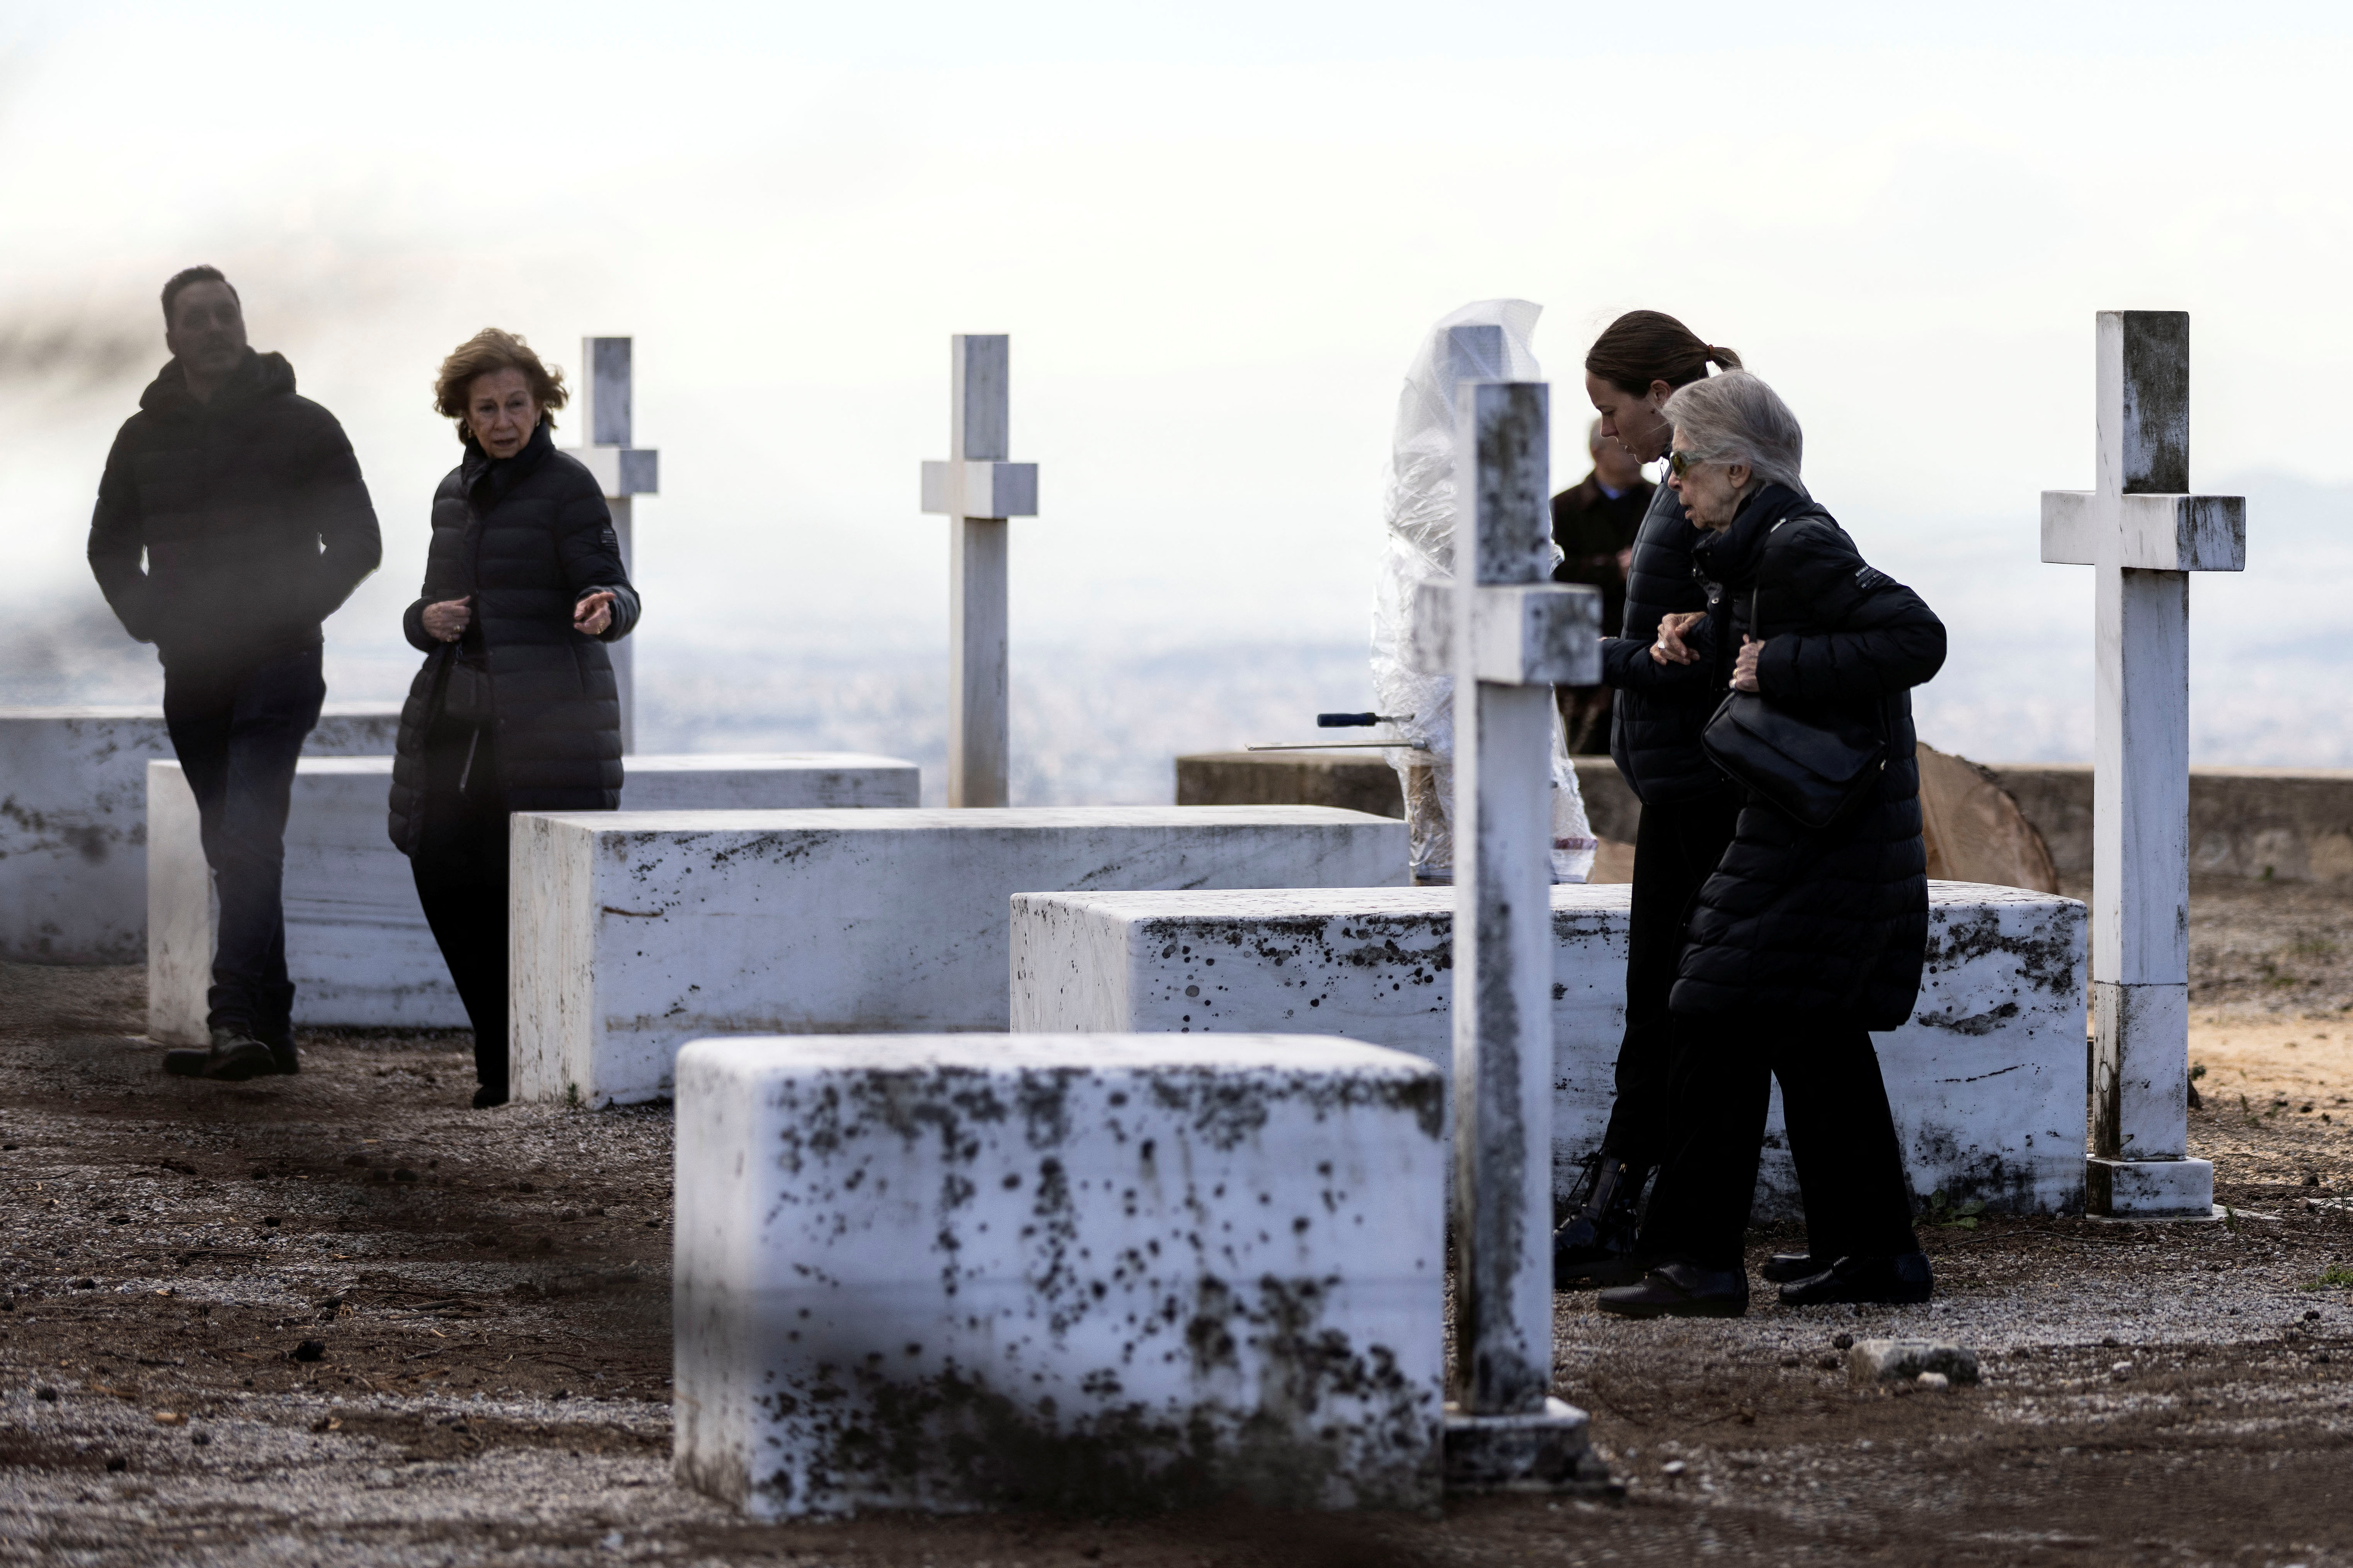 Former Queen of Spain Sofia and former Princess of Greece Irene, sisters of the late former King of Greece Constantine II, walk among the graves of members of the former Greek royal family, on the property of the summer palace where Constantine II will be buried .  REUTERS/Stelios Misinas